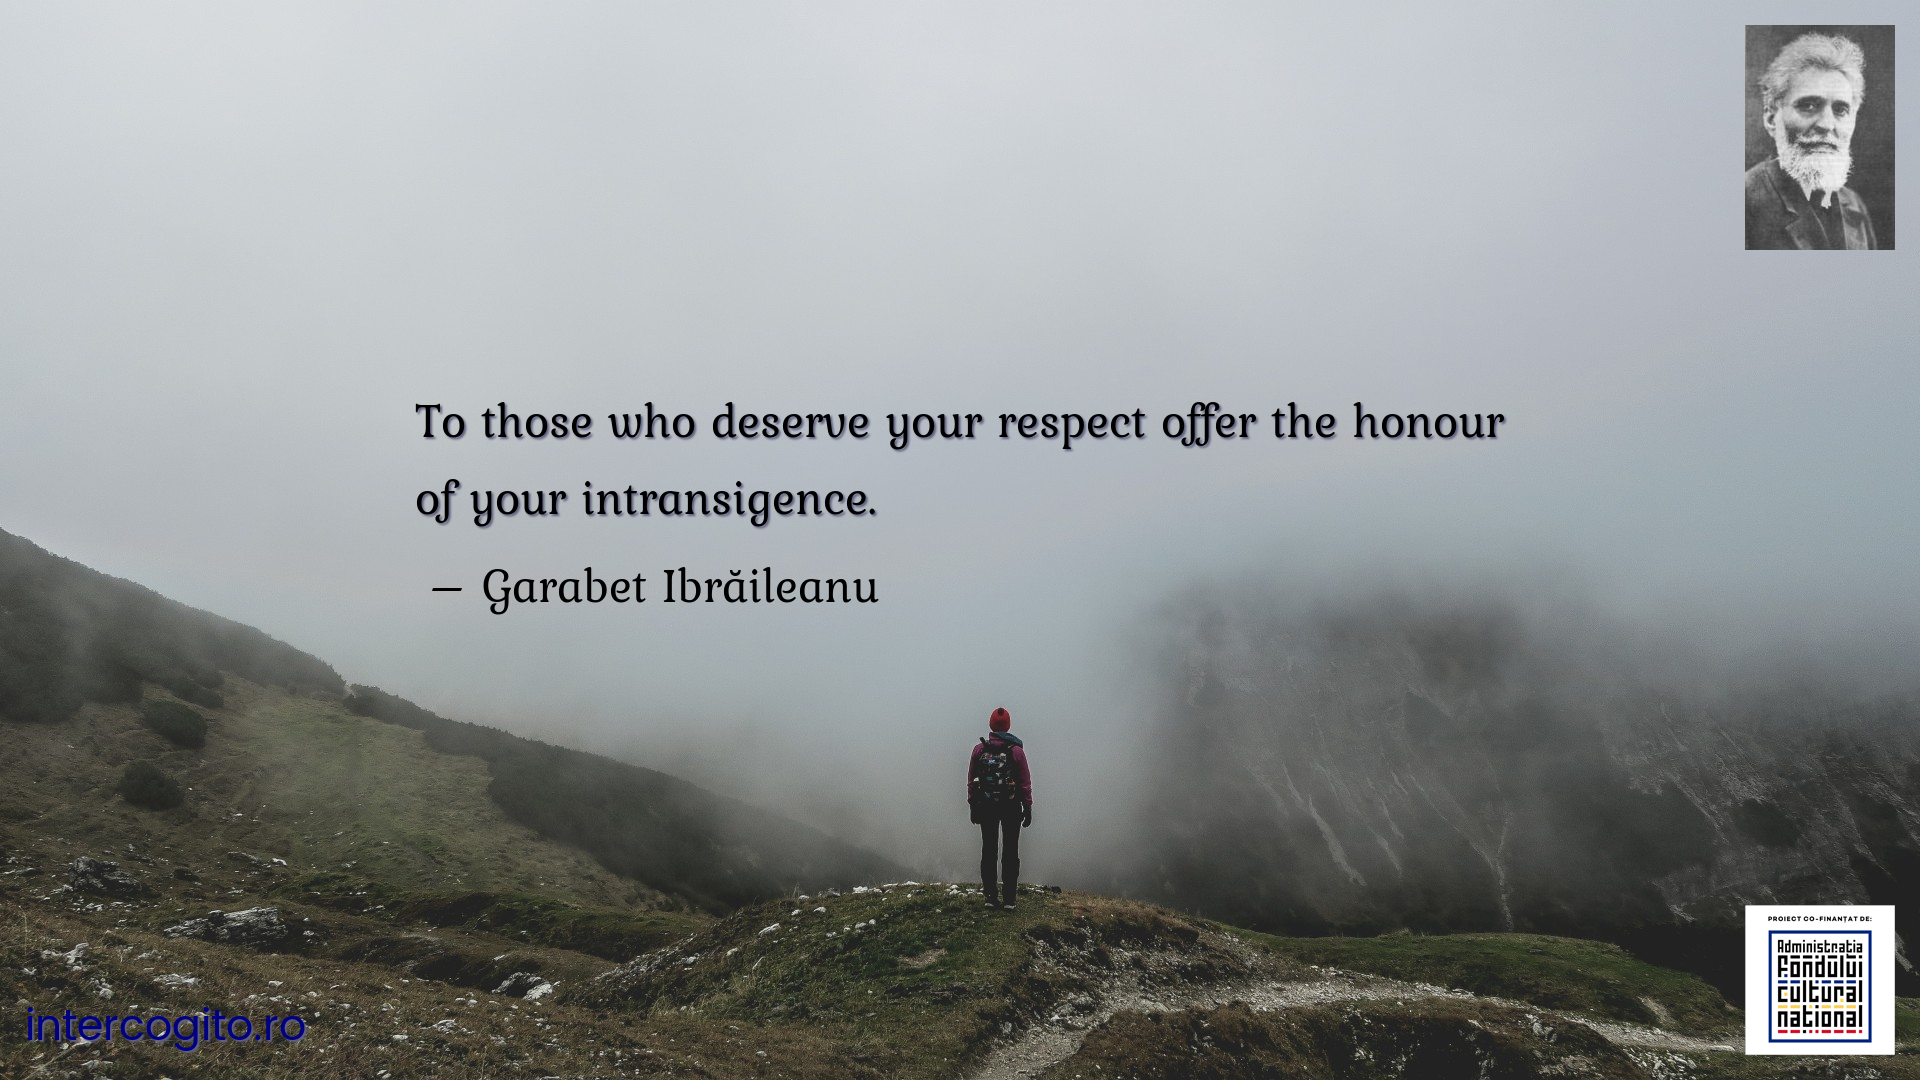 To those who deserve your respect offer the honour of your intransigence.